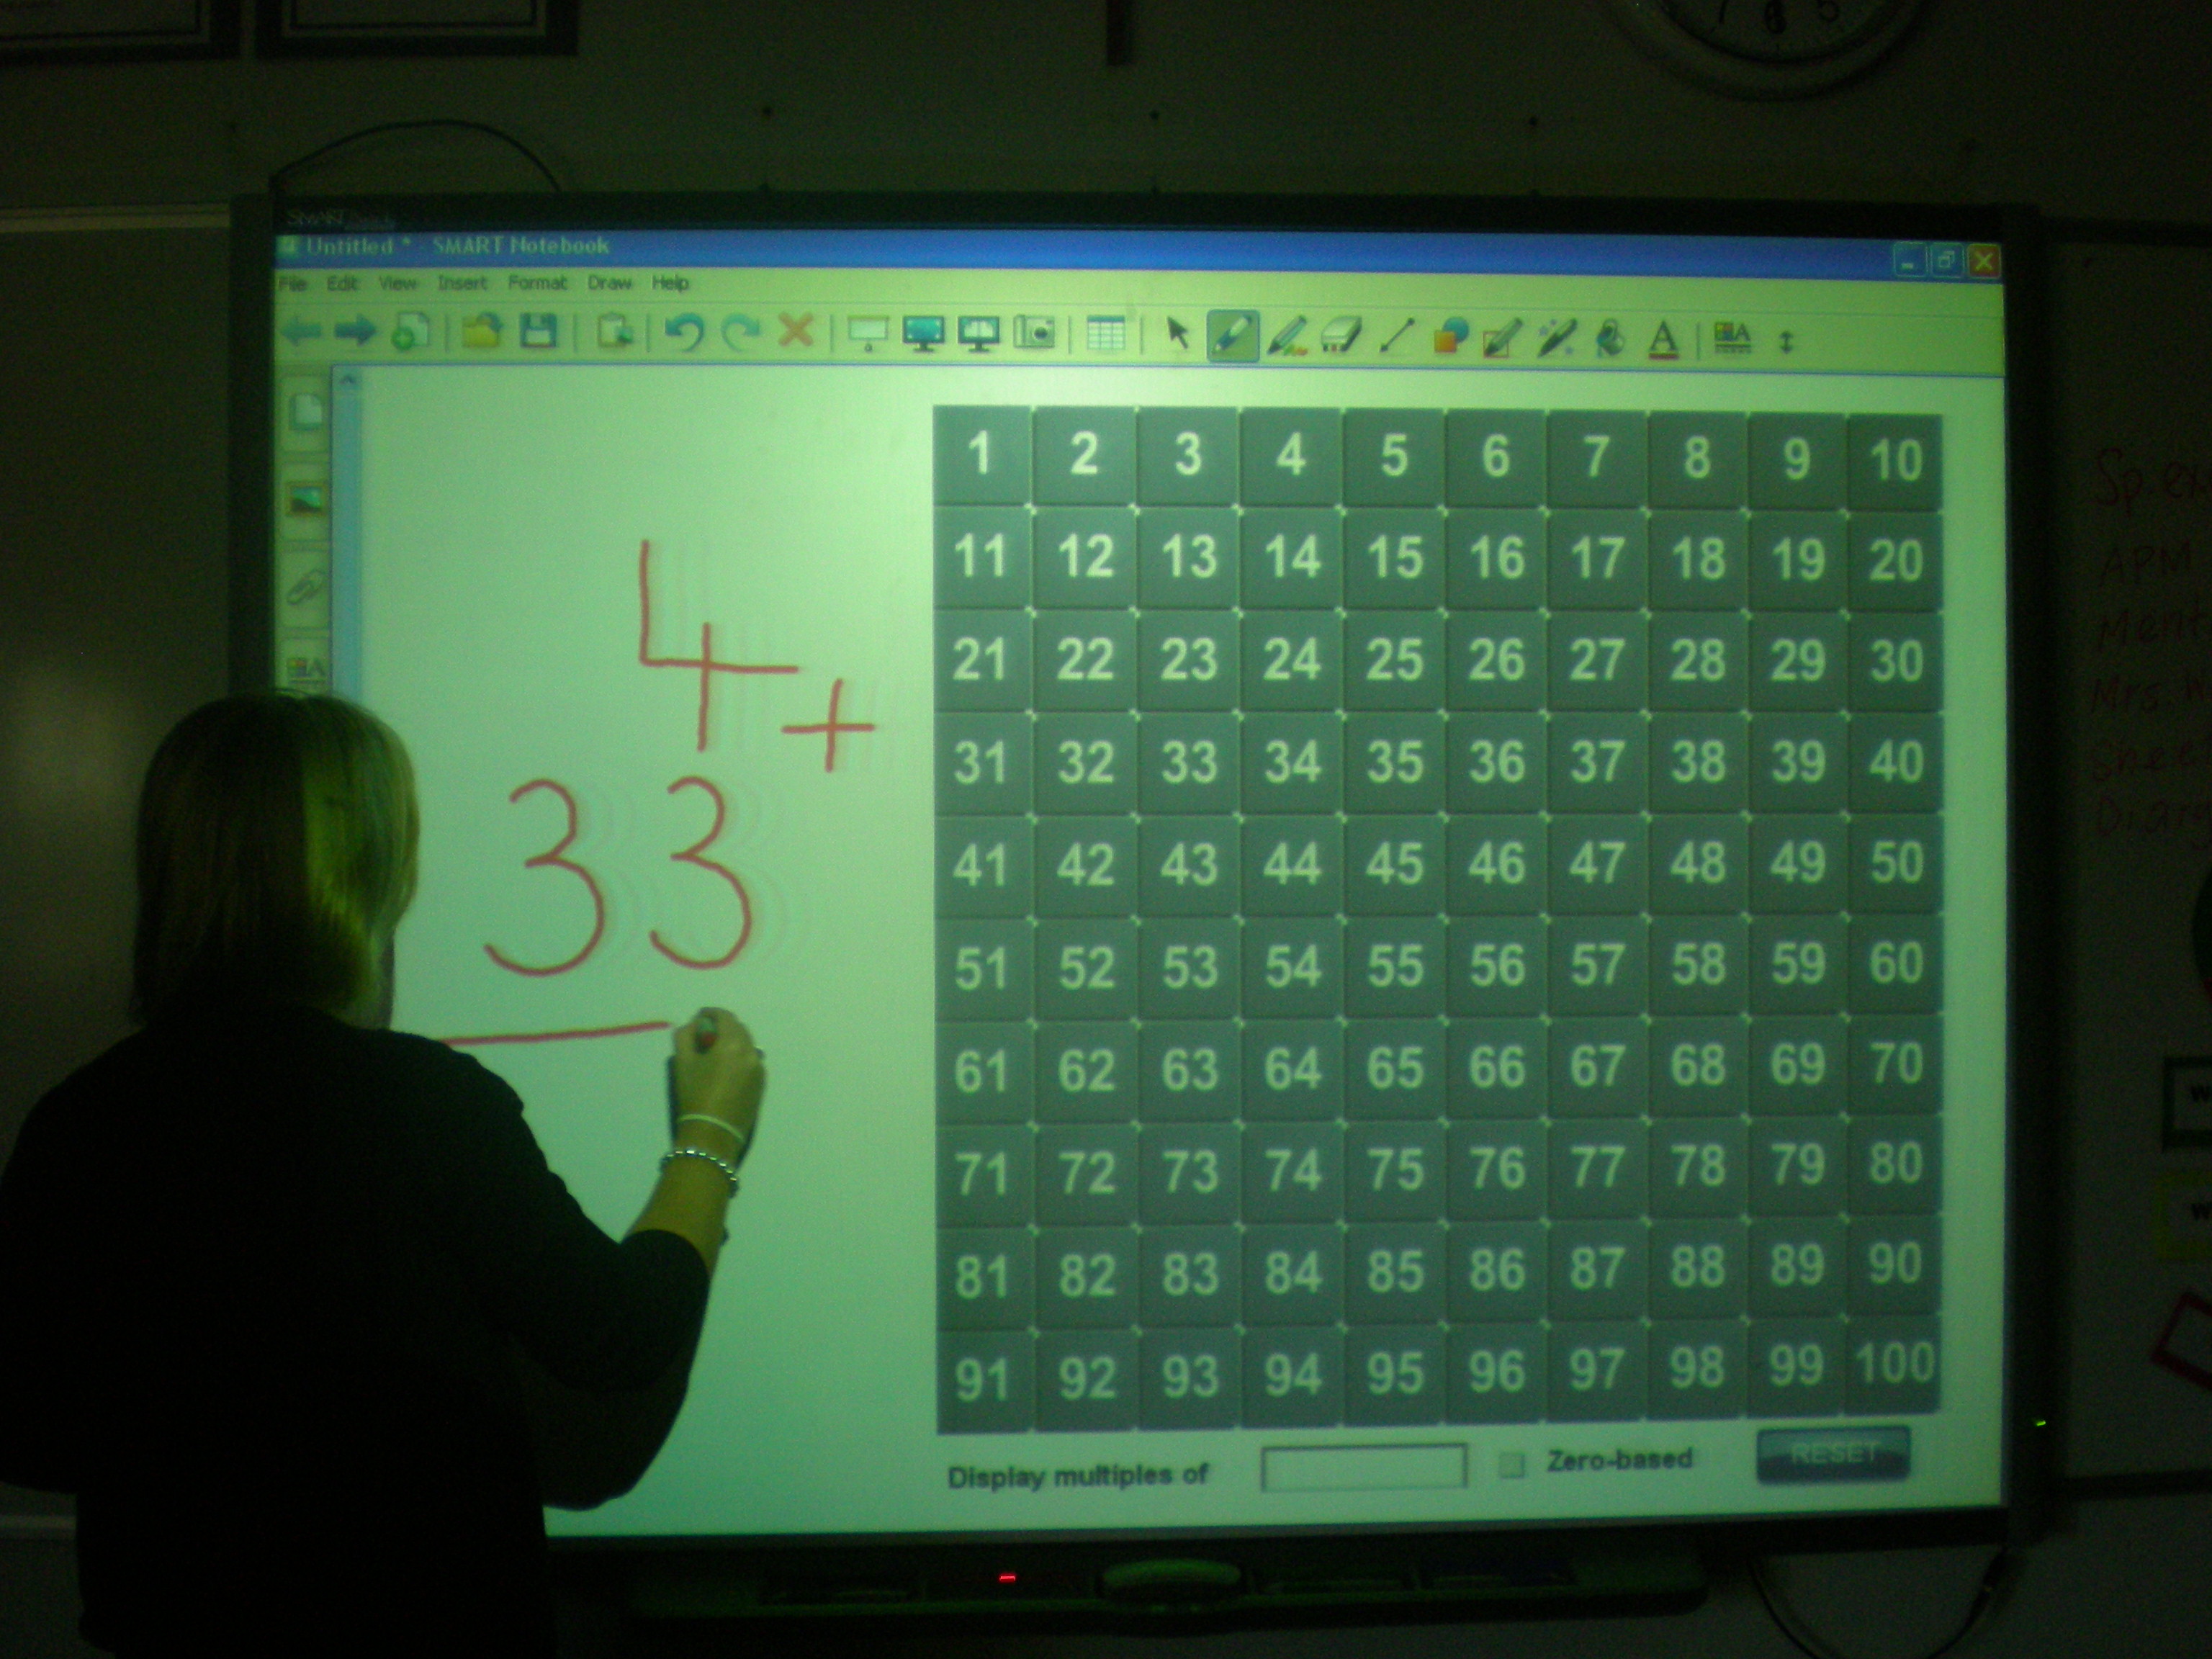 Interactive Place Value Chart Smartboard